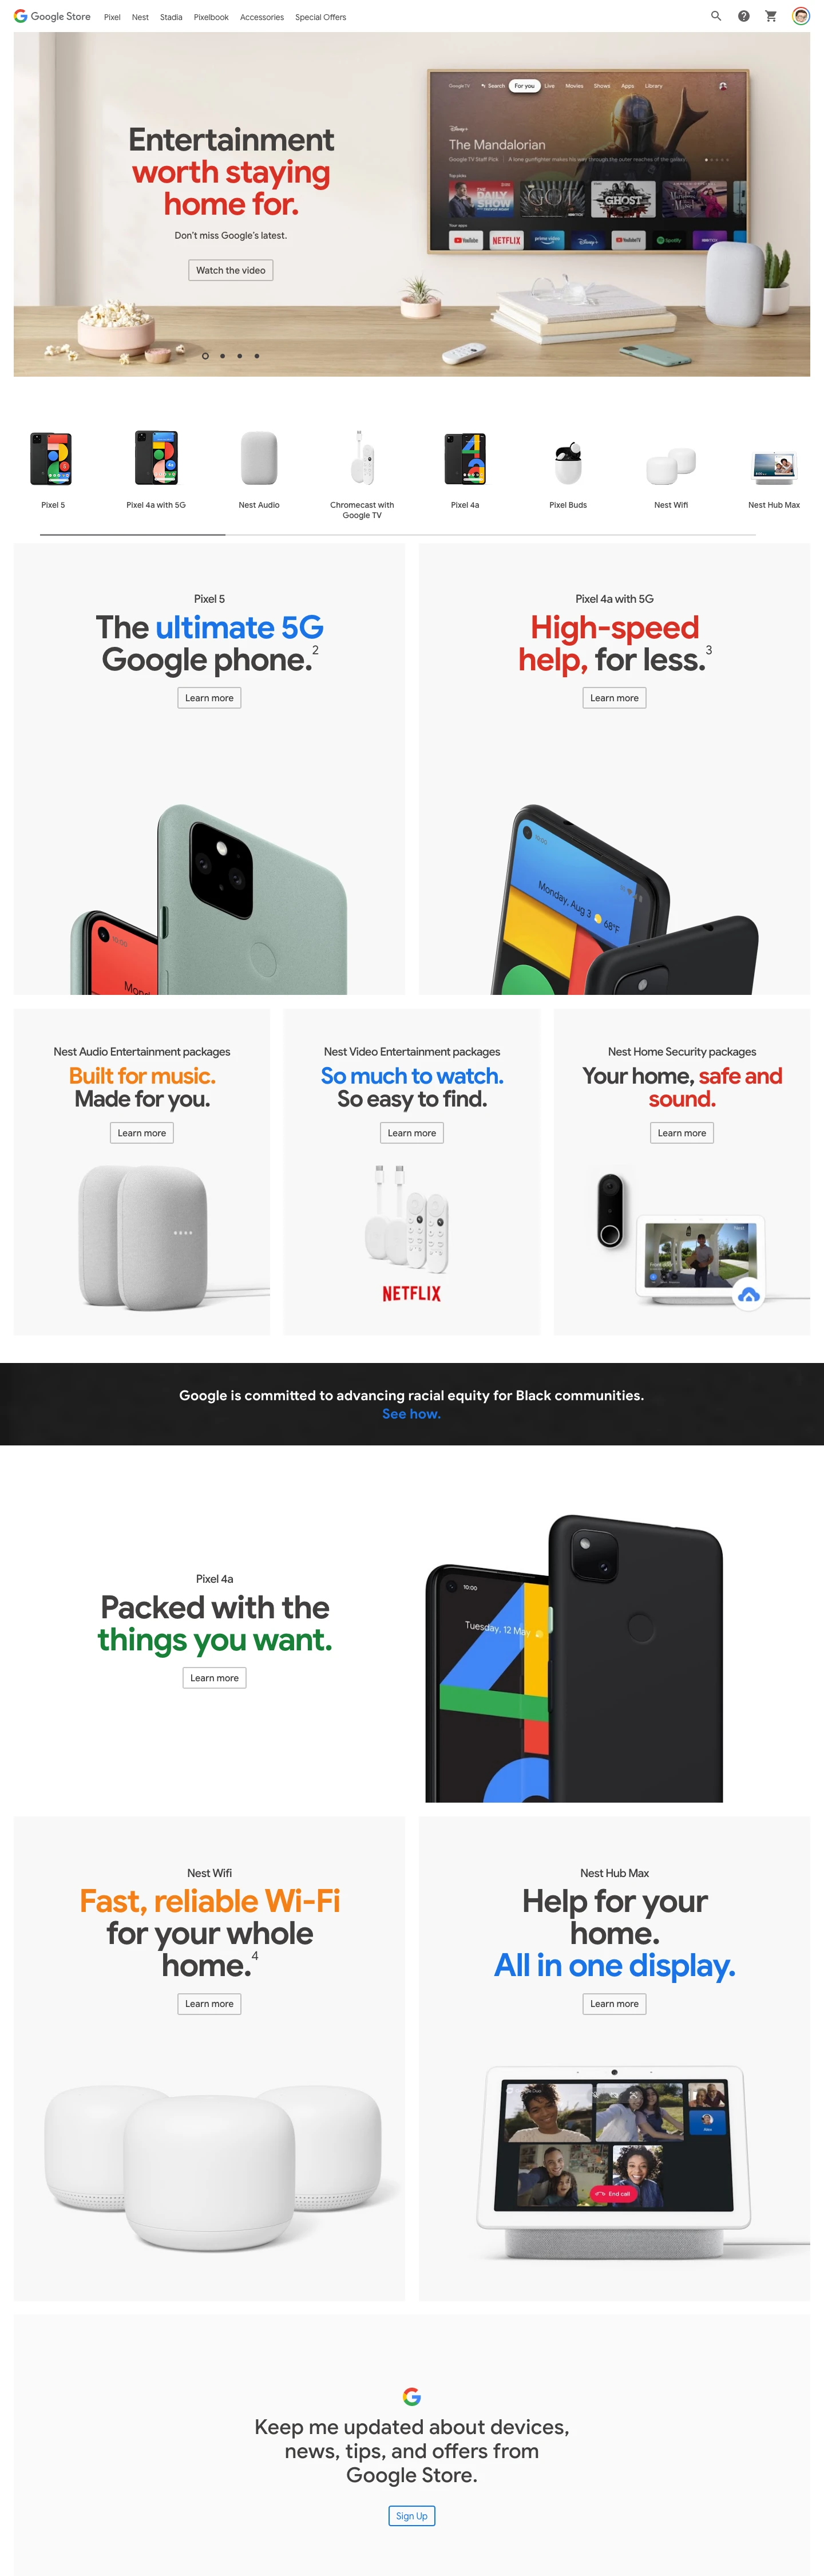 Google Store Landing Page Example: Google Made Devices & Accessories